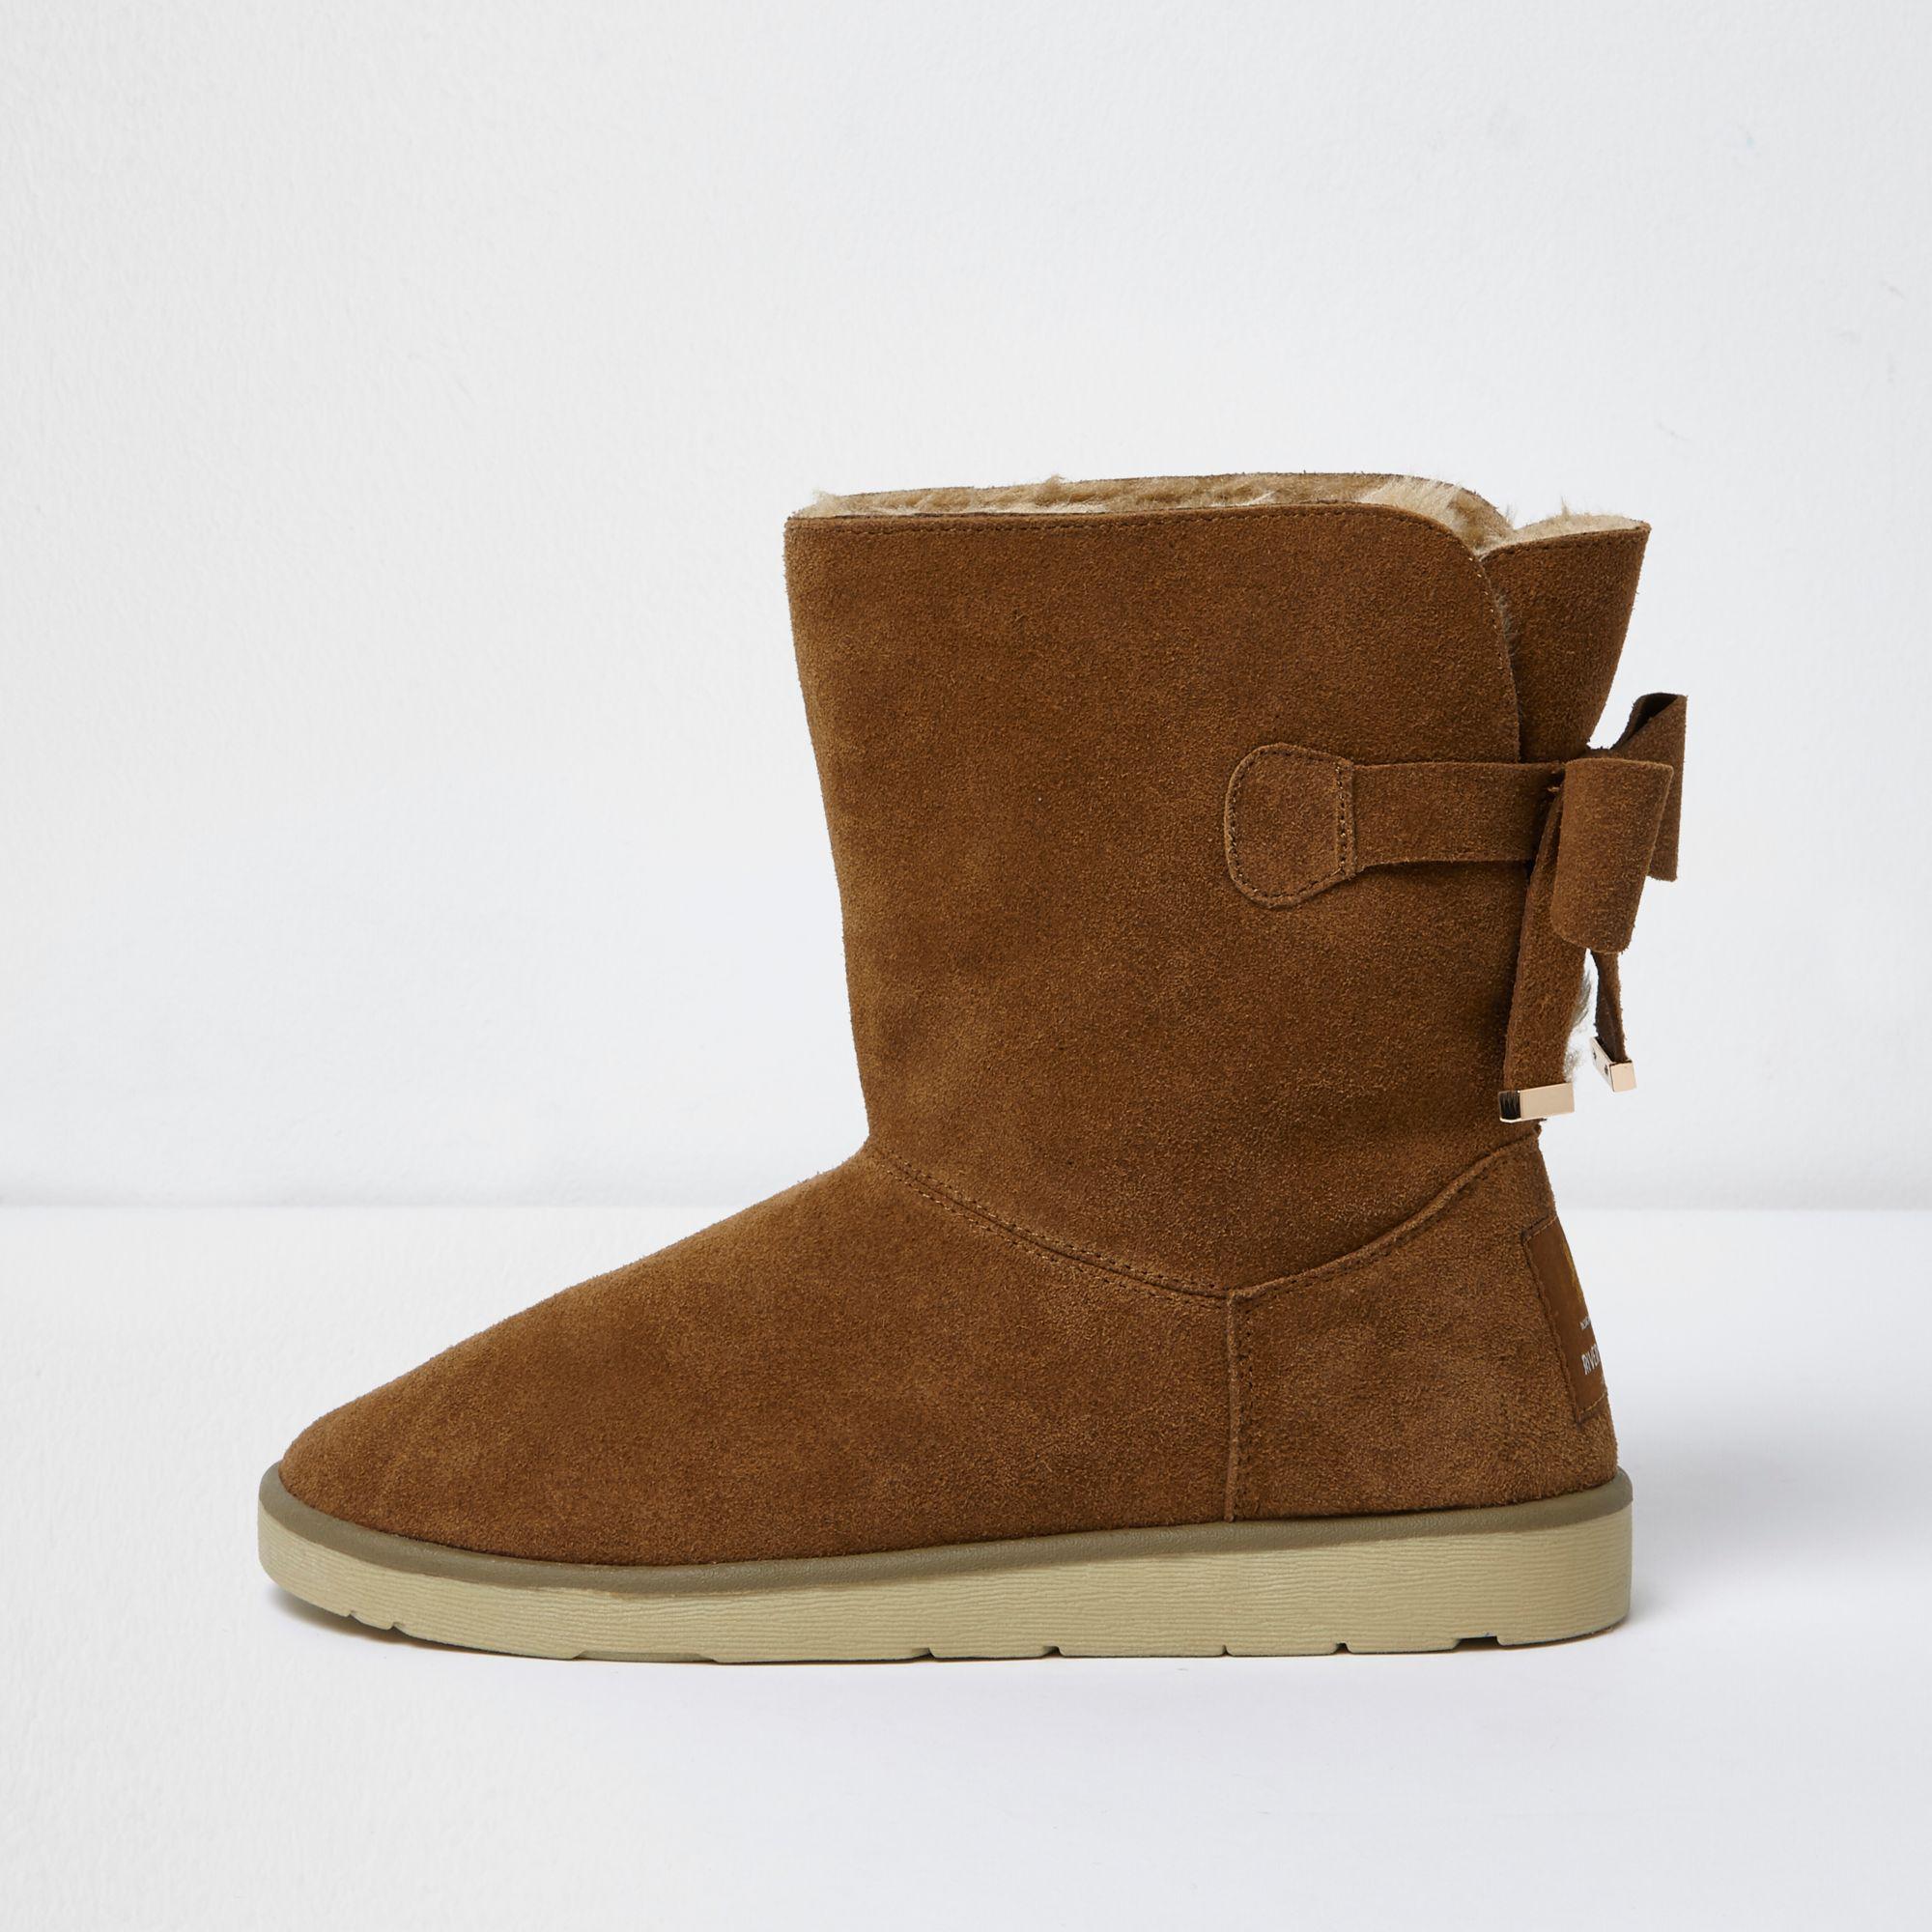 river island ankle ugg boots 